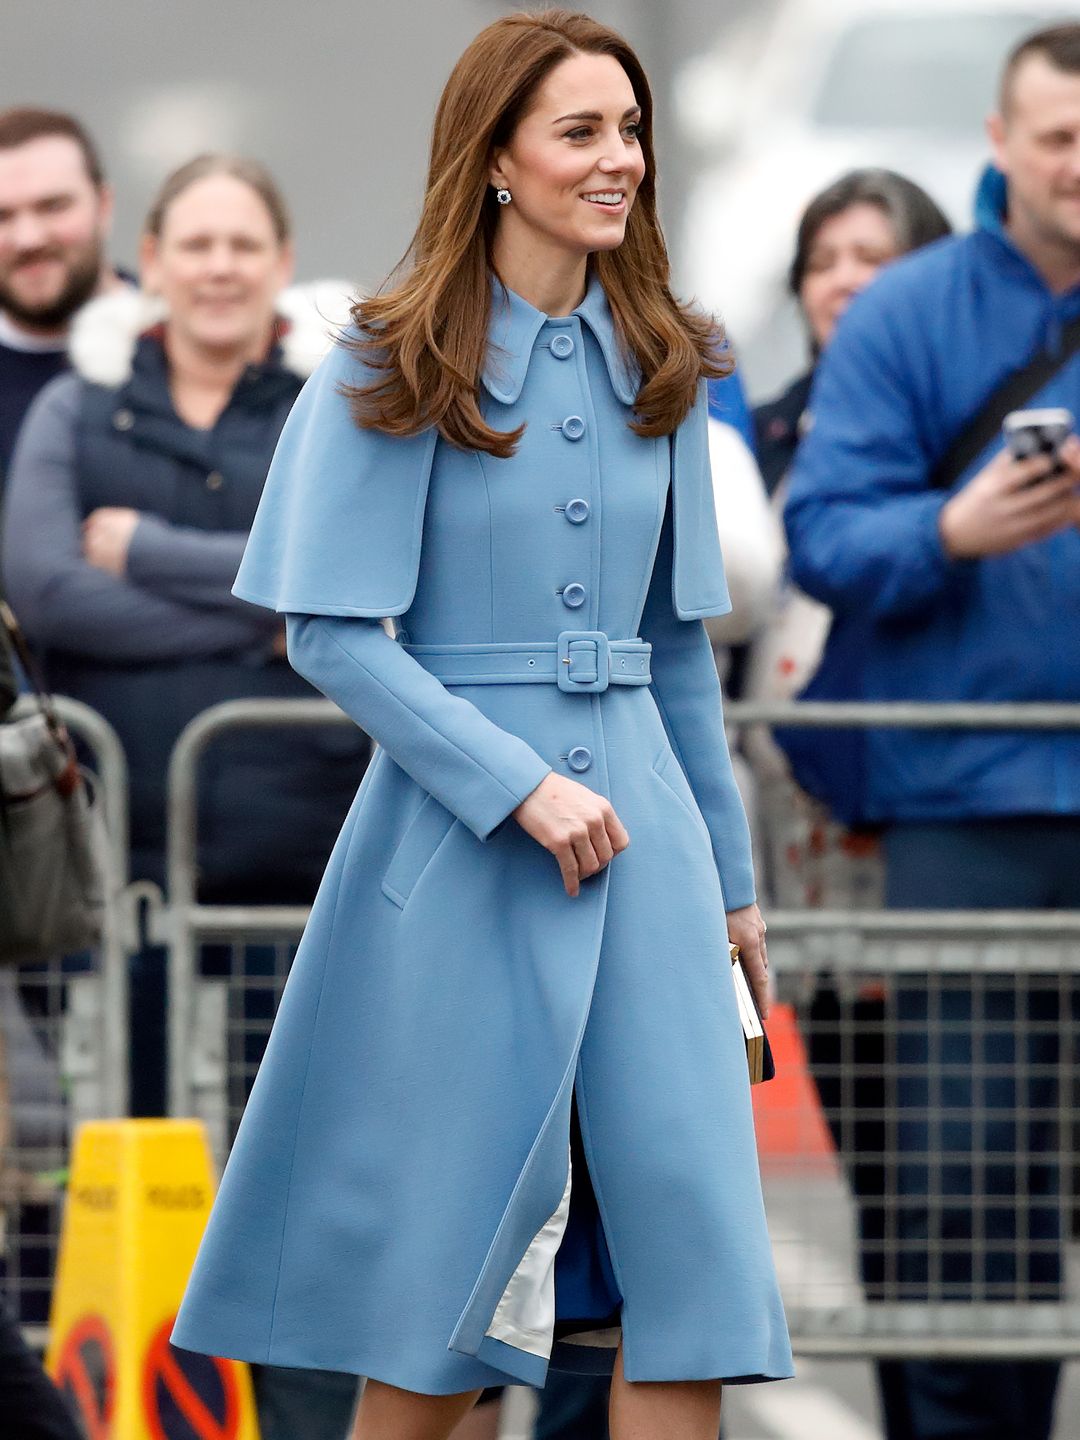 Catherine, Duchess of Cambridge visits CineMagic at the Braid Arts Centre on February 28, 2019 in Ballymena, Northern Ireland wearing Mulberry